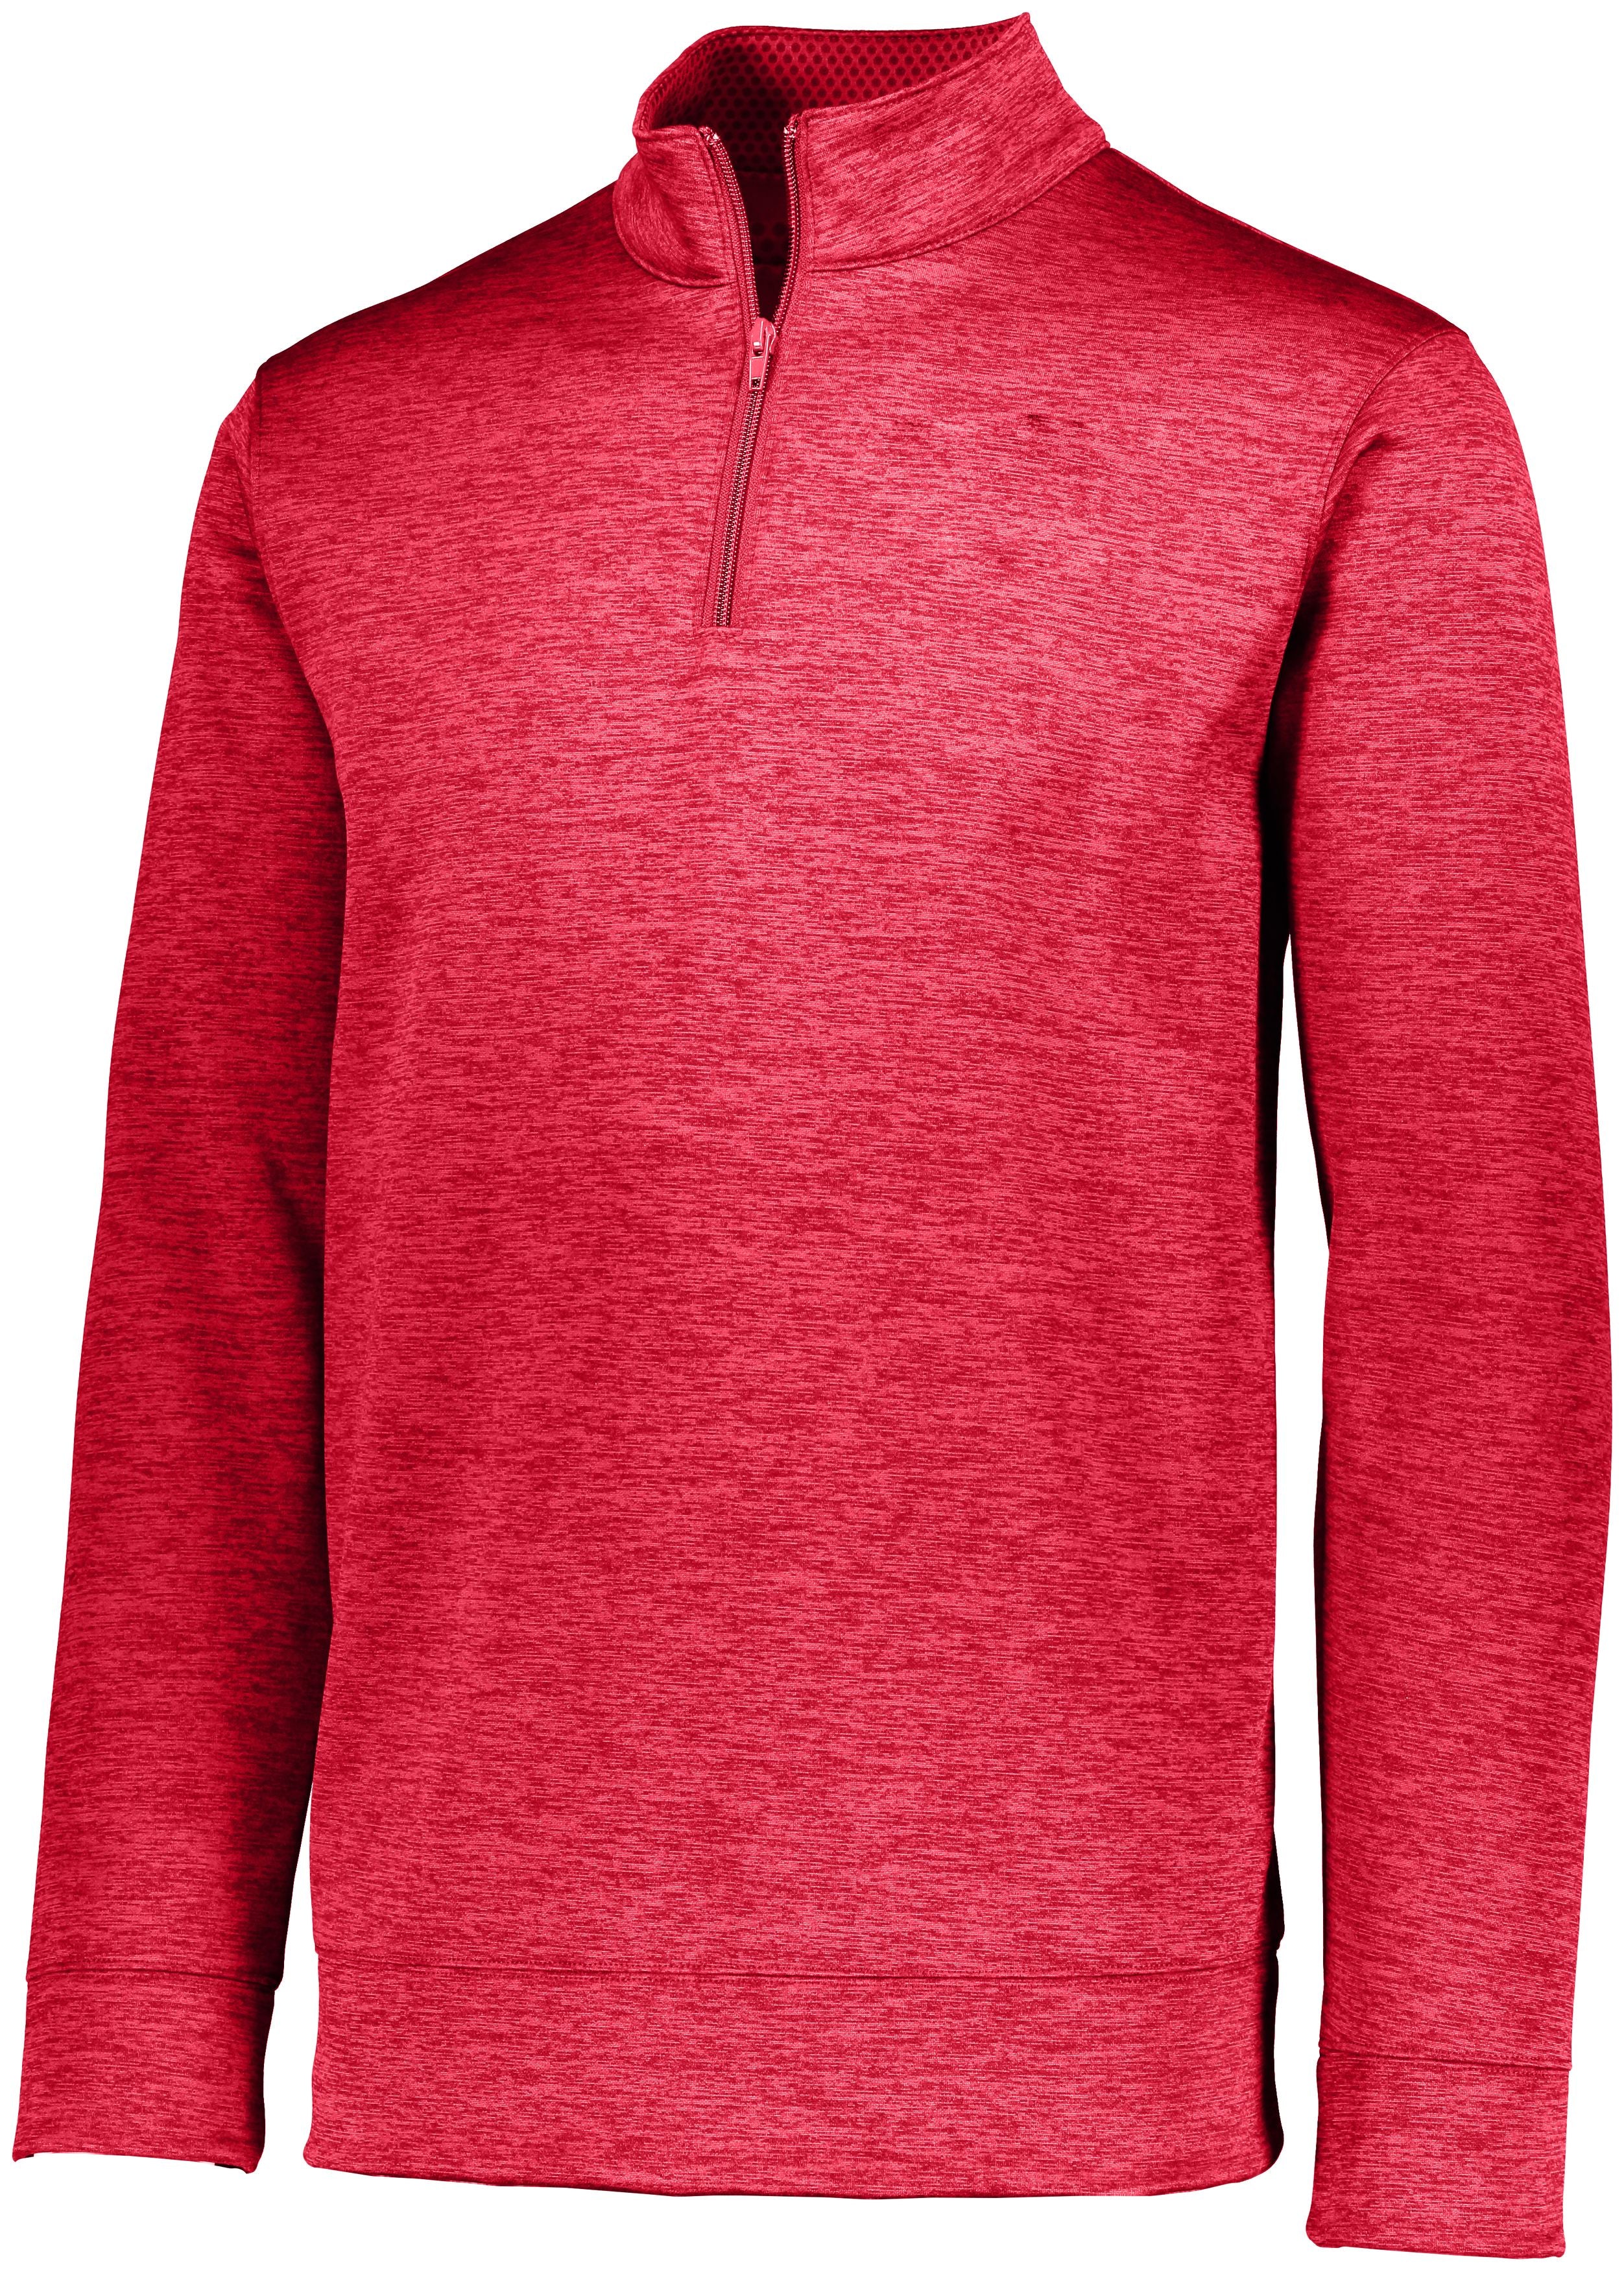 Augusta Sportswear Stoked Tonal Heather Pullover in Red  -Part of the Adult, Adult-Pullover, Augusta-Products, Outerwear, Tonal-Fleece-Collection product lines at KanaleyCreations.com